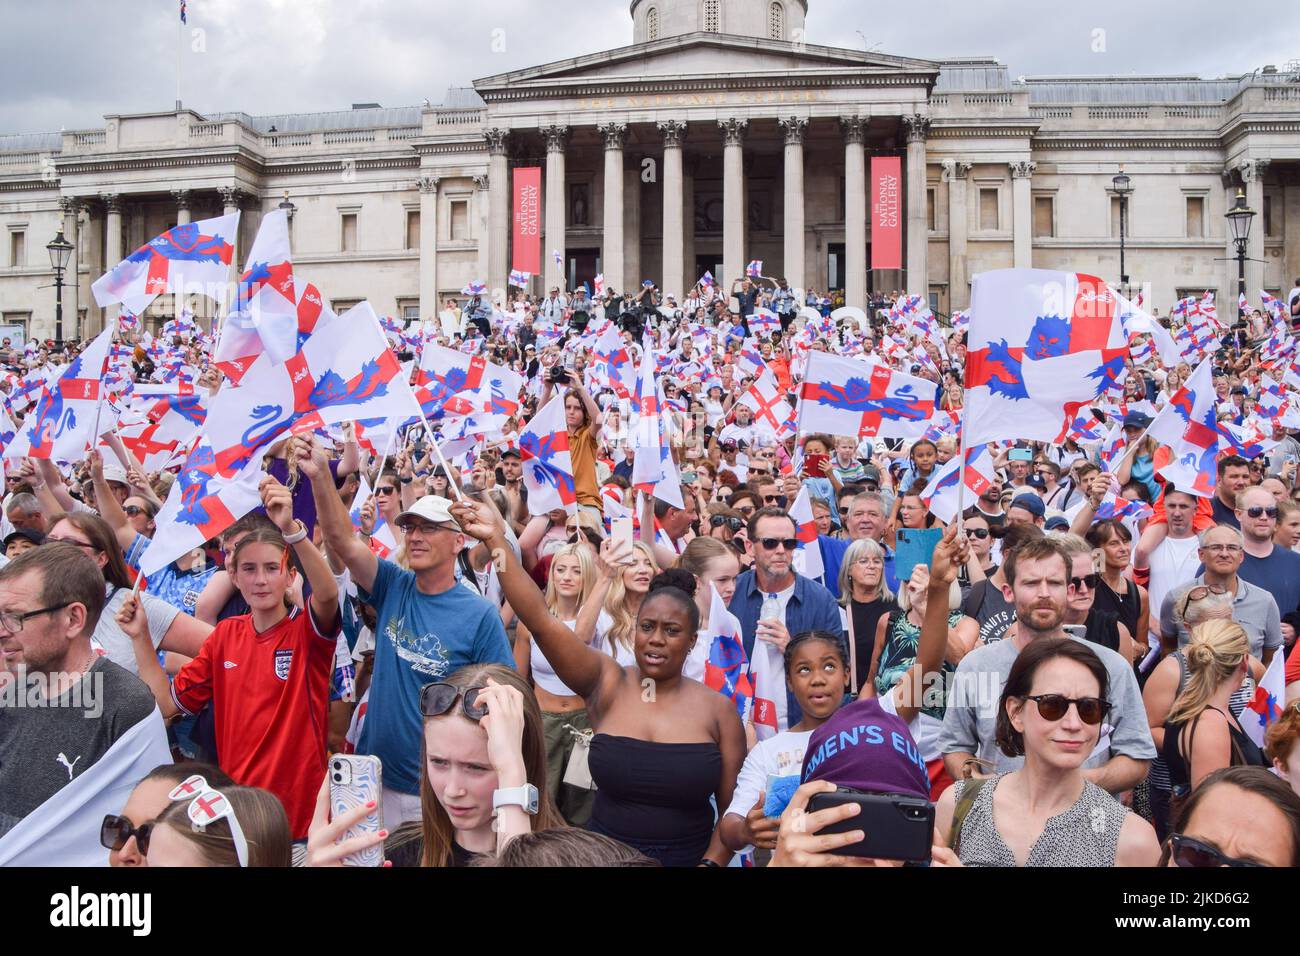 London, UK. 01st Aug, 2022. Supporters wave England flags during the Women's Euro 2022 special event in Trafalgar Square. Thousands of people gathered to celebrate the England team, known as the Lionesses, winning Women's Euro 2022 soccer tournament. England beat Germany 2-1. (Photo by Vuk Valcic/SOPA Images/Sipa USA) Credit: Sipa USA/Alamy Live News Stock Photo